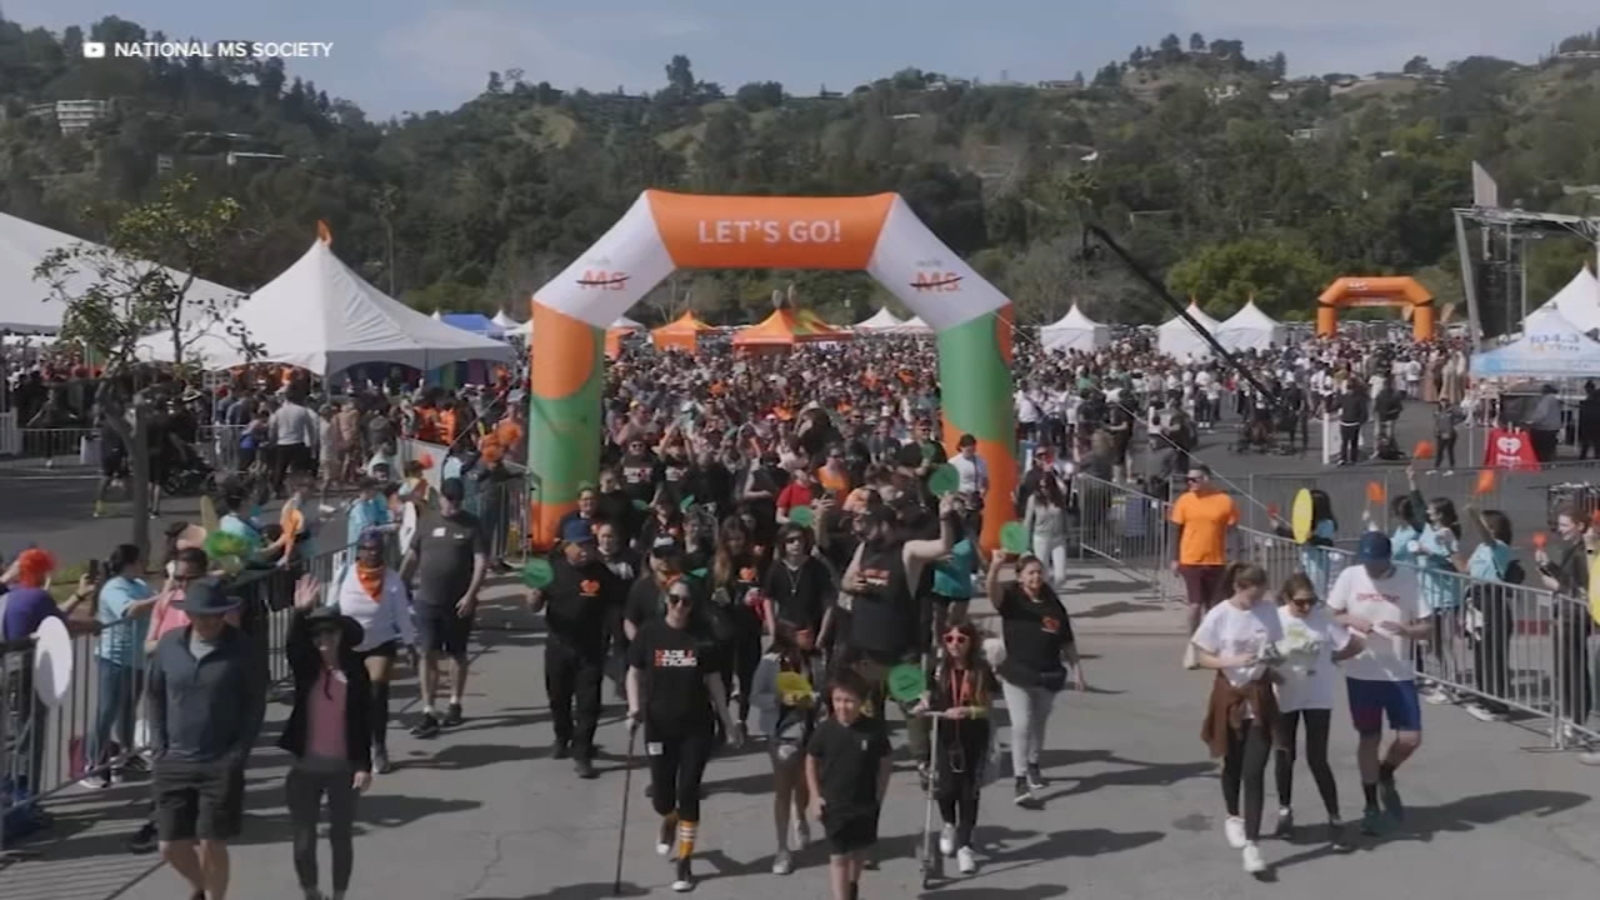 More than 4K expected to participate in Walk MS: Chicago at Soldier Field to support those living with multiple sclerosis [Video]